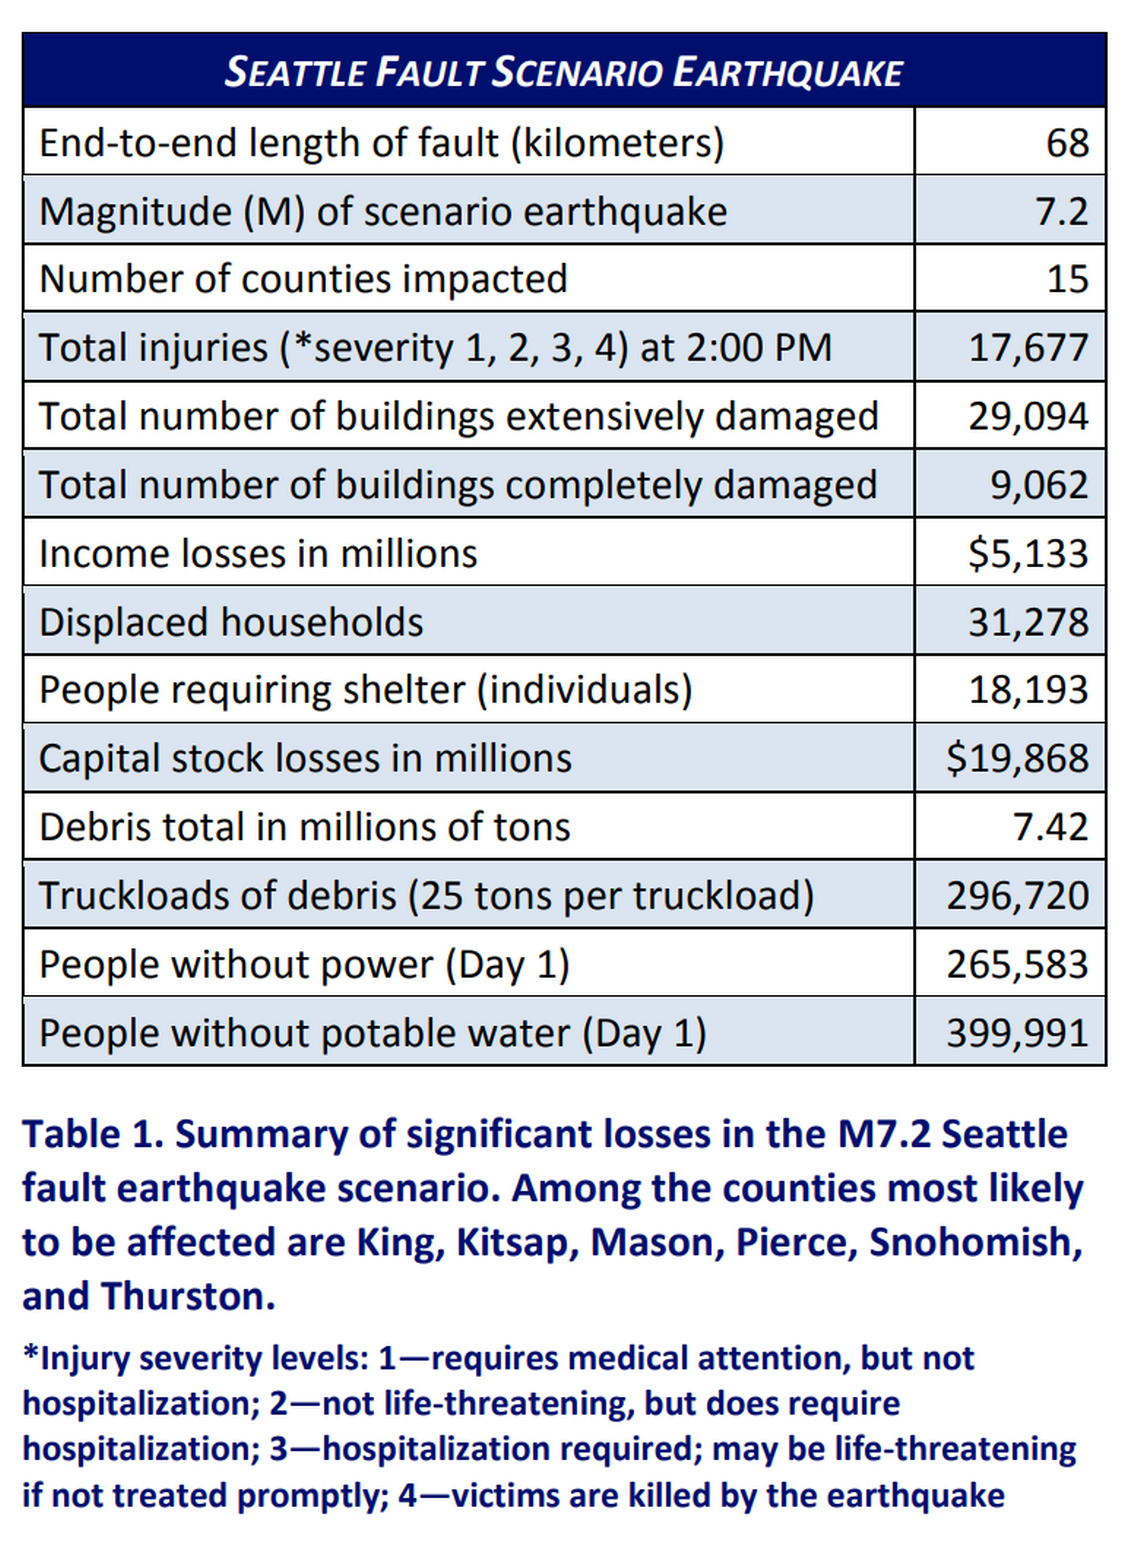 Estimates from the Washington Military Department on the damage and loss of life in a 7.2 magnitude earthquake in Seattle.